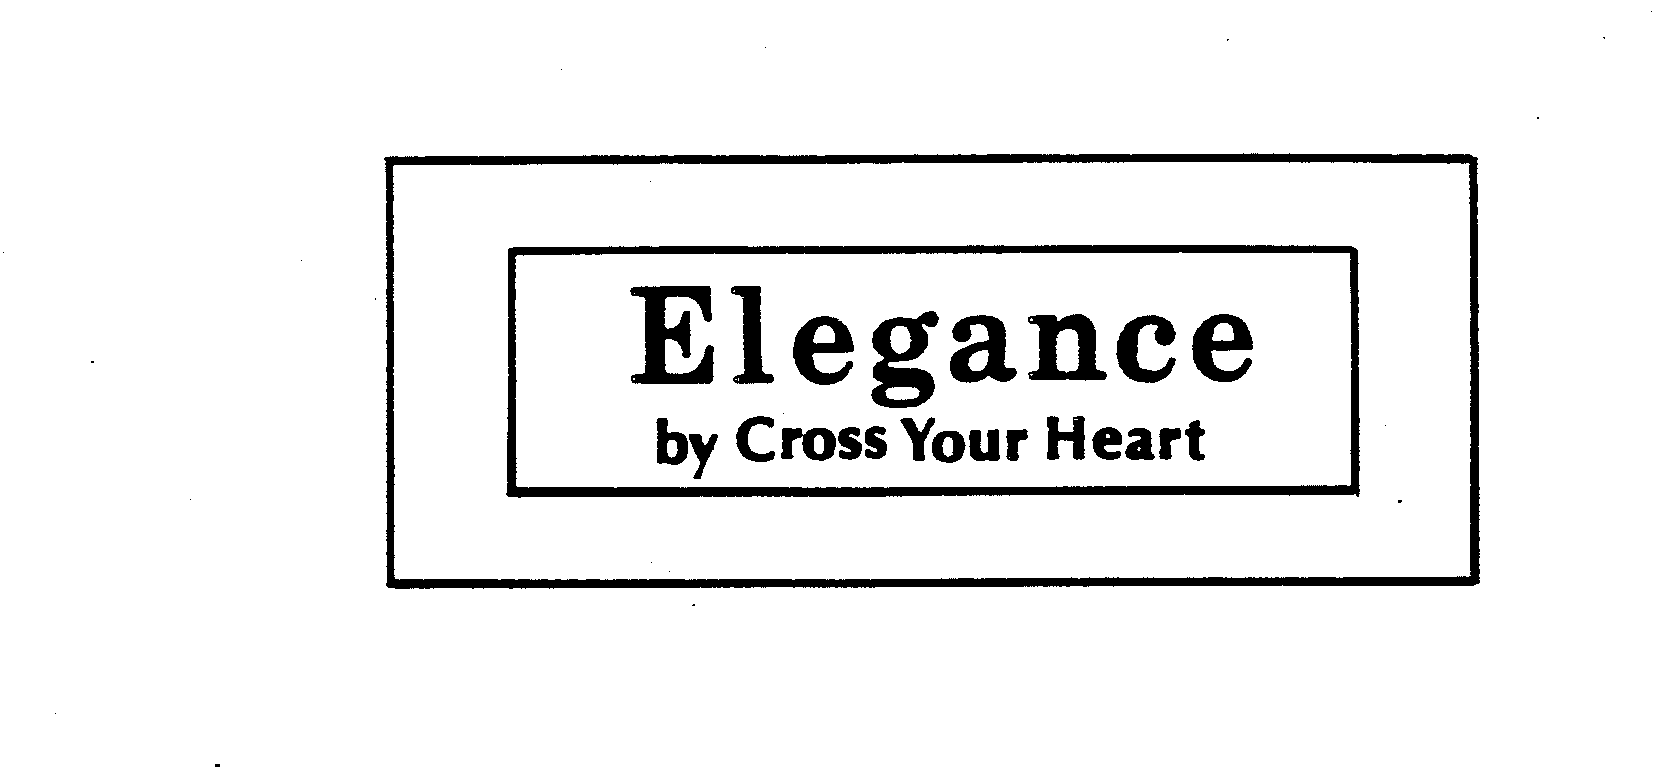  ELEGANCE BY CROSS YOUR HEART